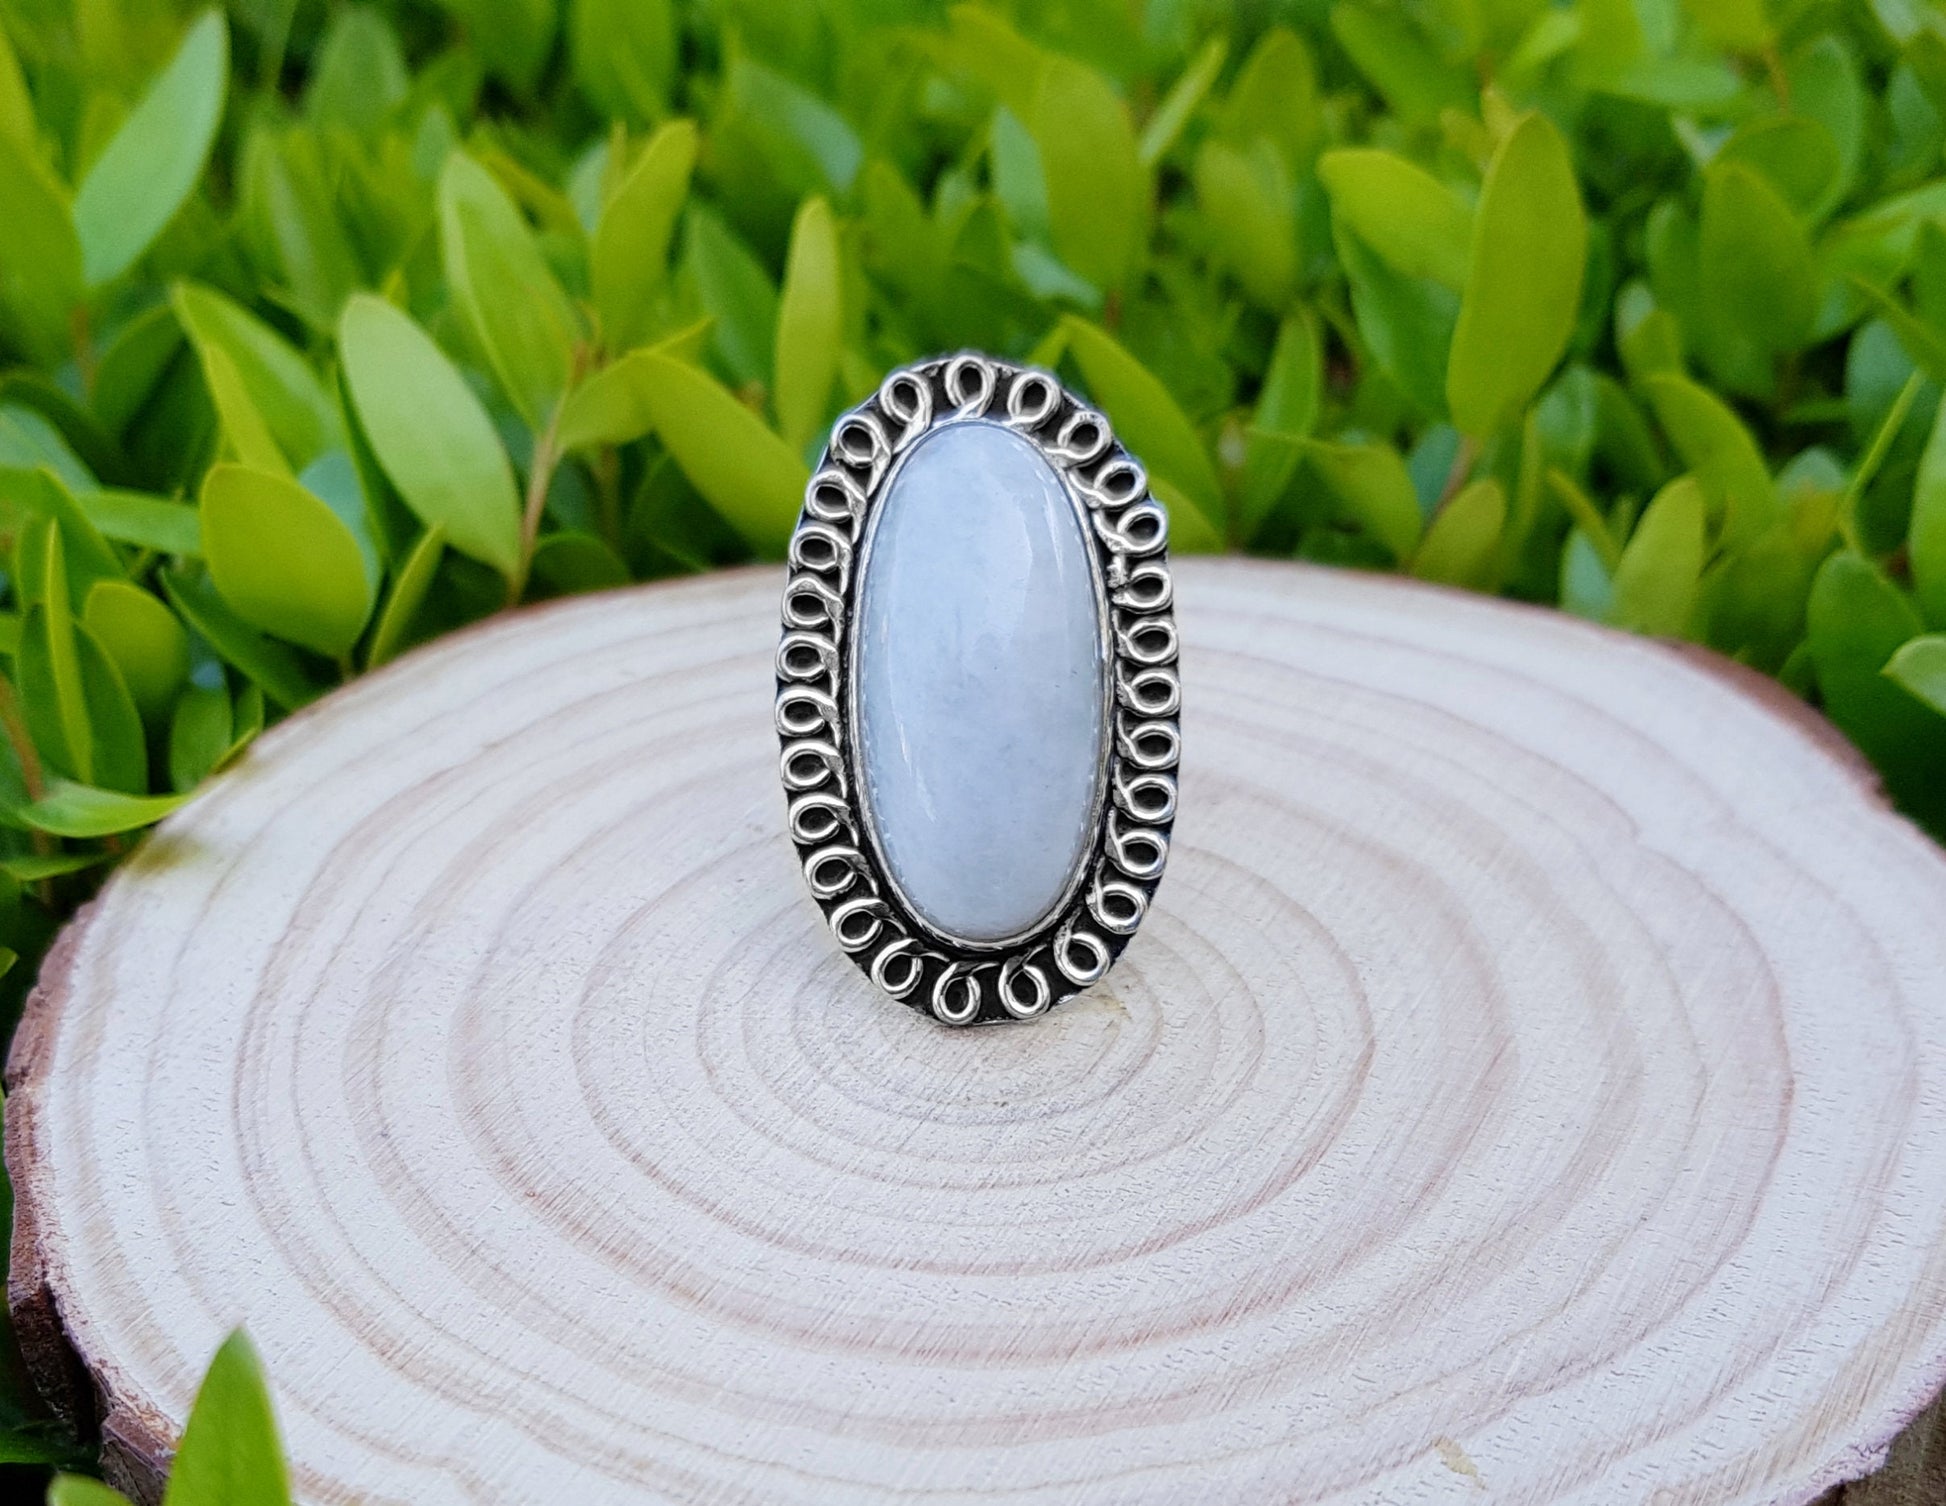 Rainbow Moonstone Ring In Sterling Silver Size US 8 Boho Crystal Ring Gemstone Ring GypsyJewelry One Of A Kind Gift For Women